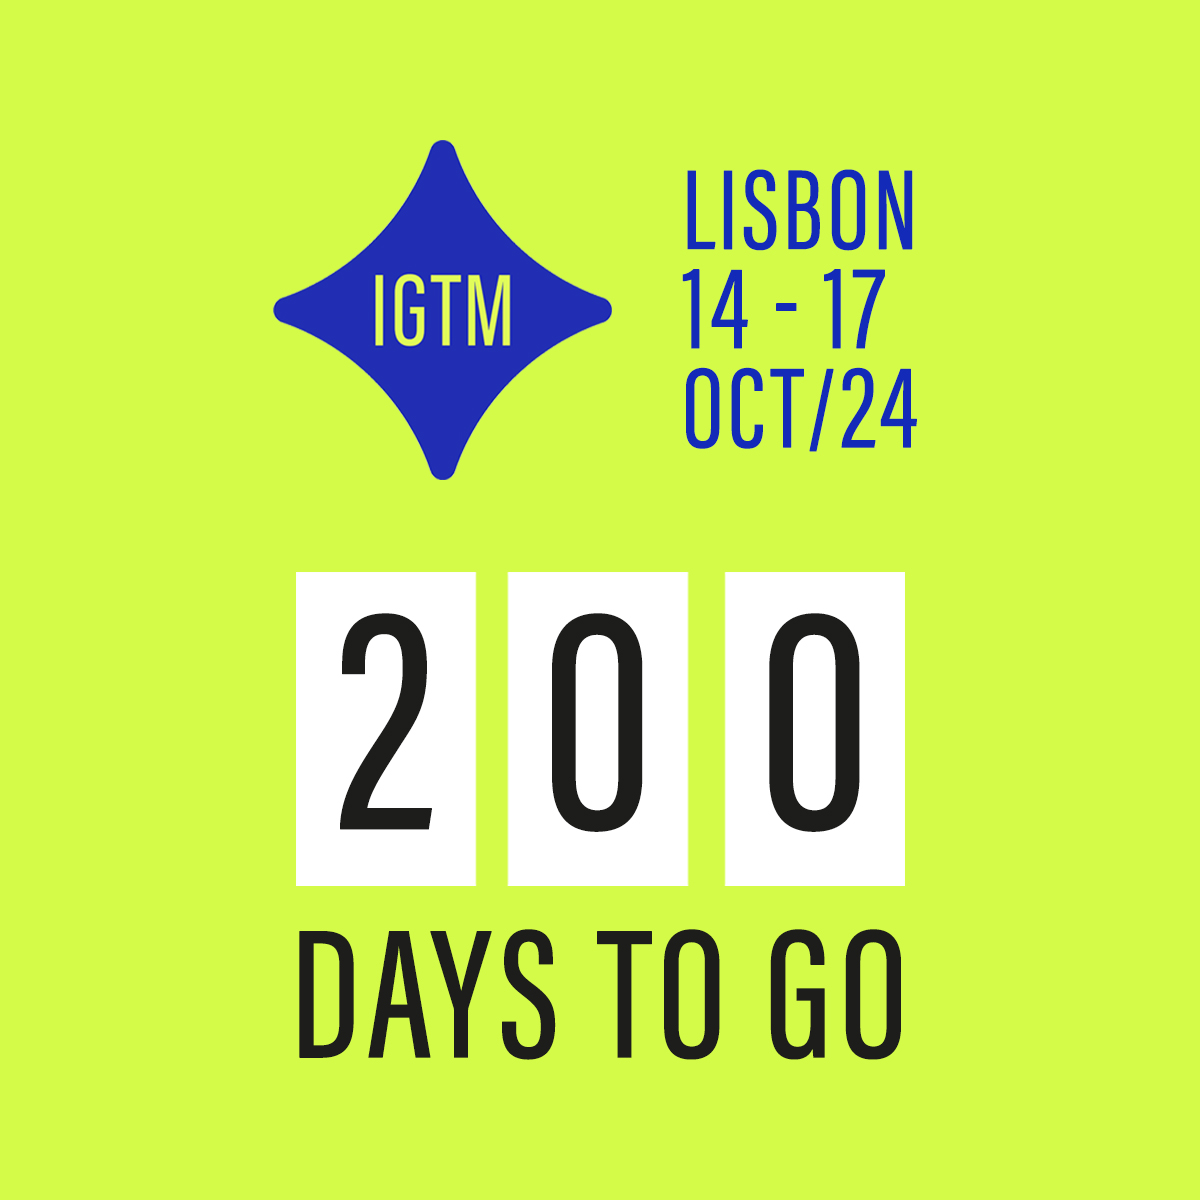 The countdown is on to Lisbon! ⏳ Exhibitor registration is OPEN for this year's IGTM in the Portuguese captial. igtmarket.com #GolfTogether